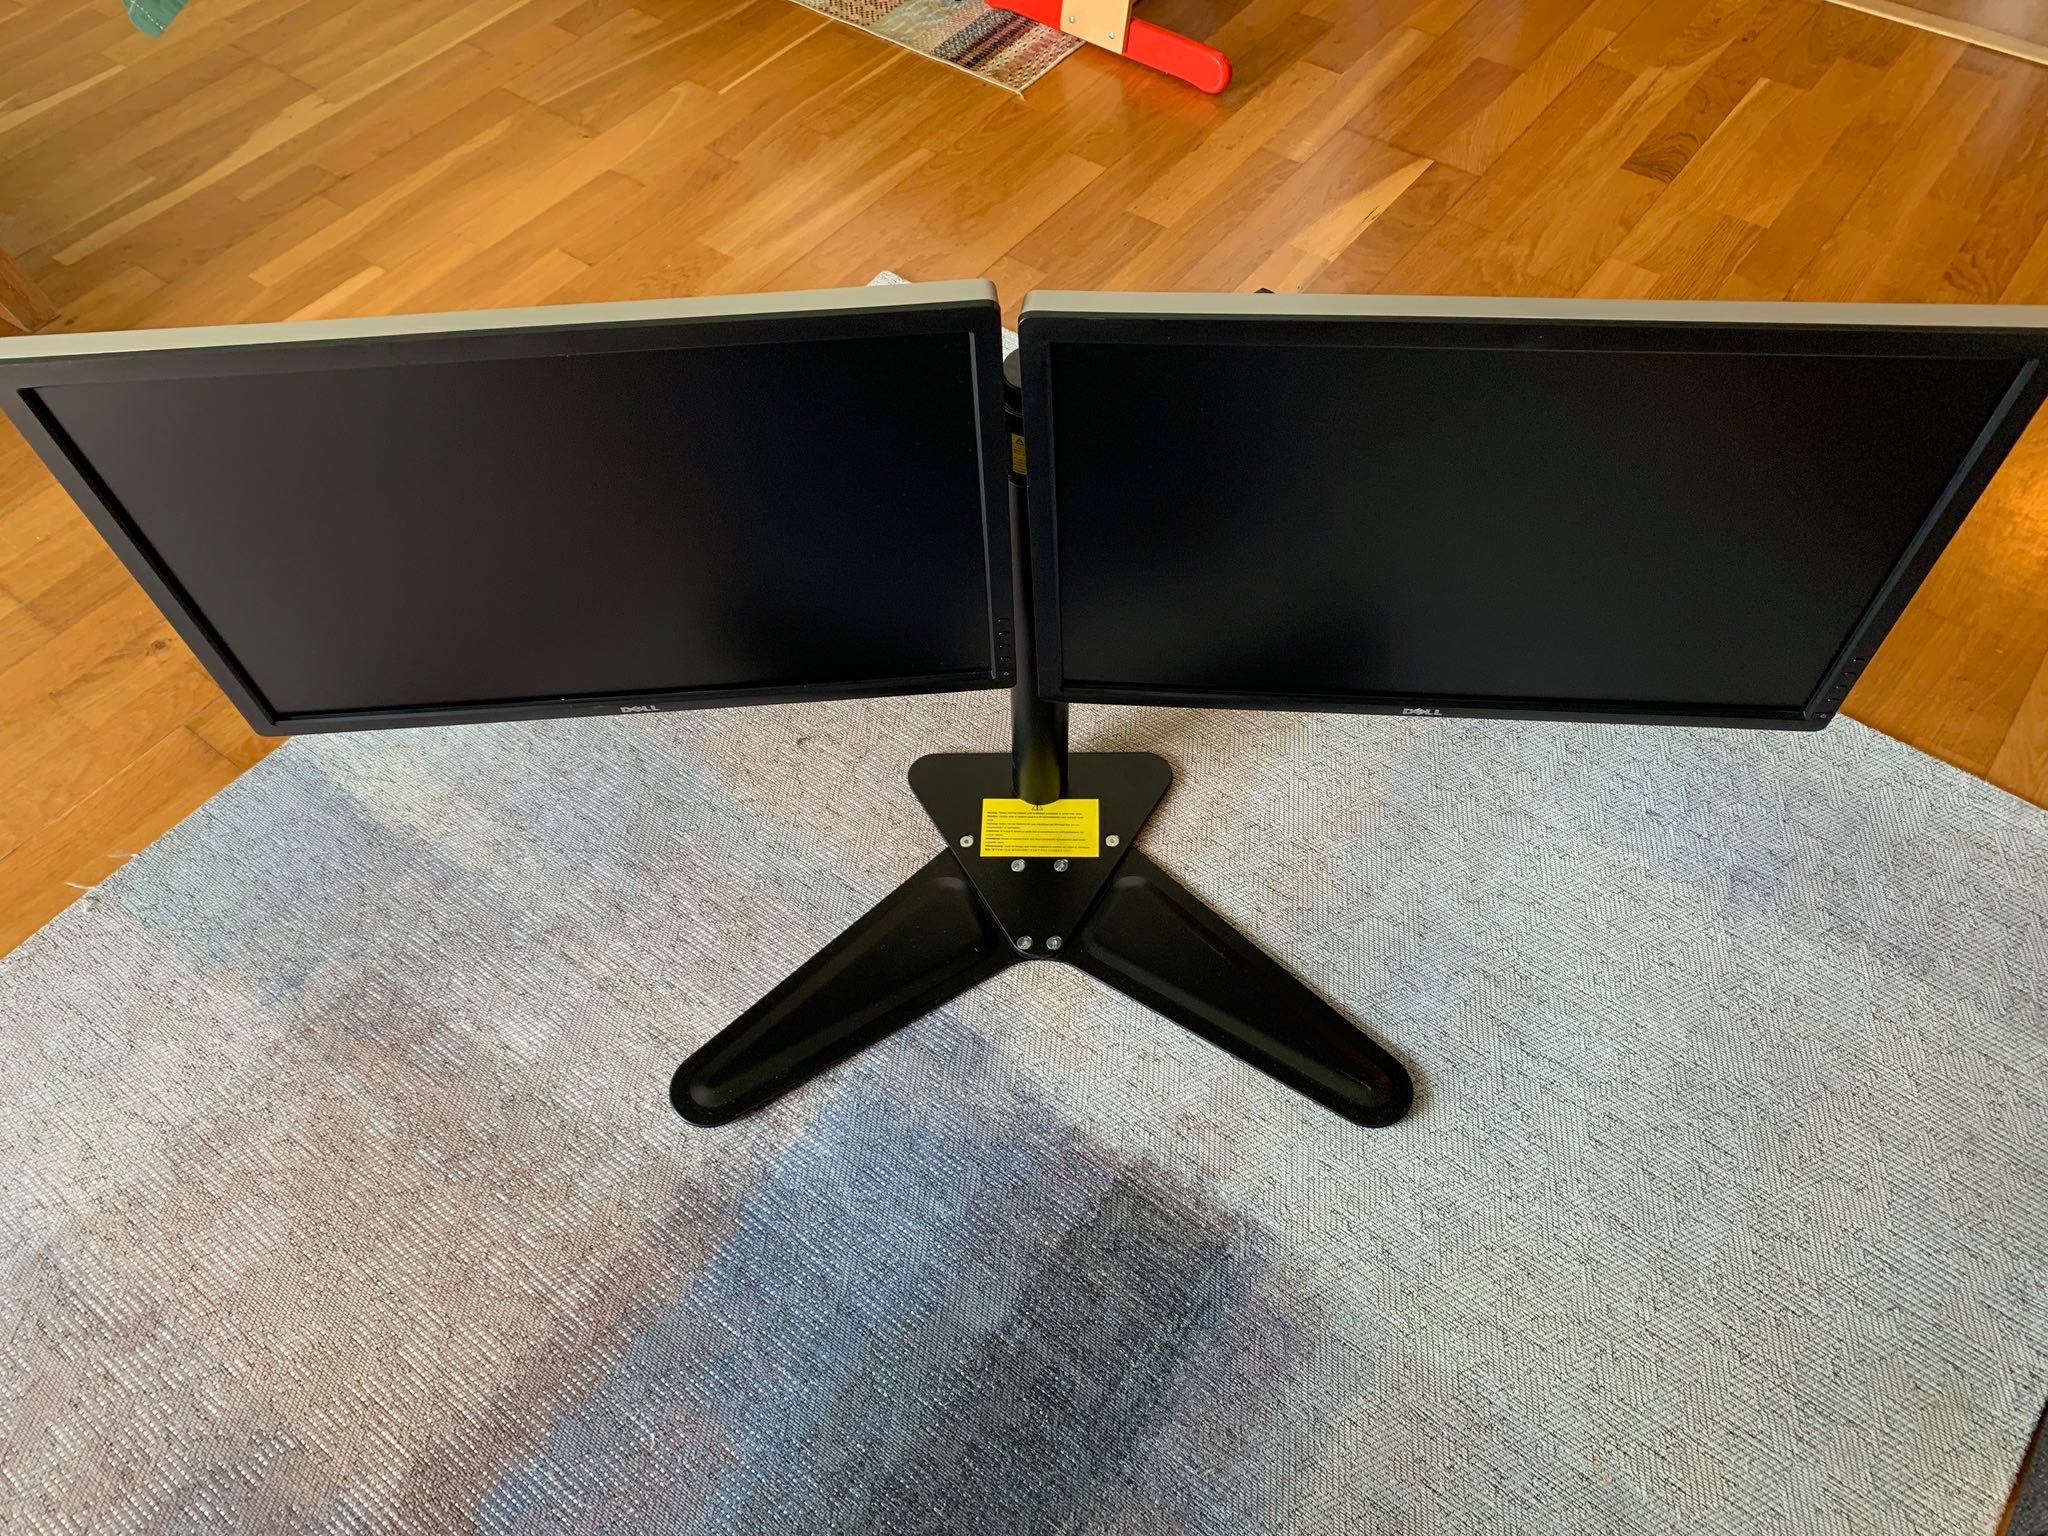 2x monitores 24" Dell U2412M / Two screens + support and cables